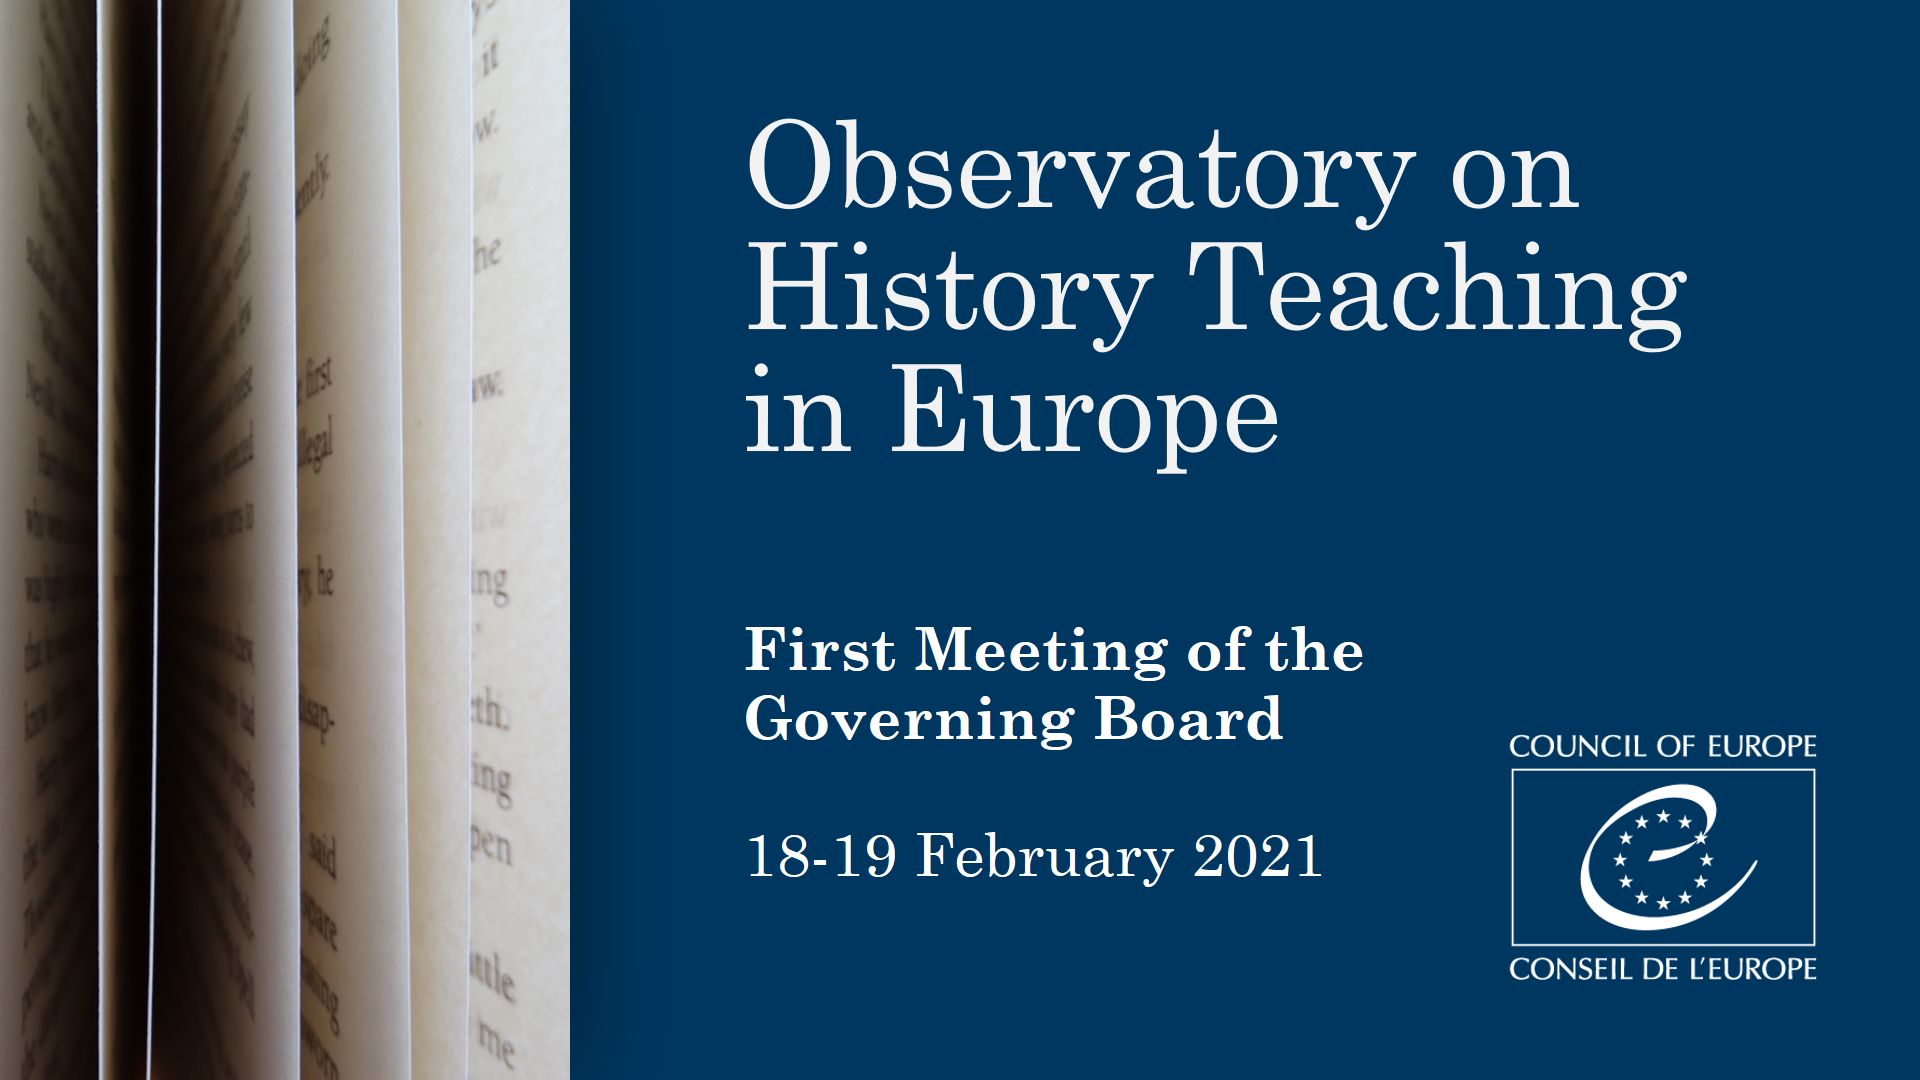 Observatory on History Teaching in Europe starts its work